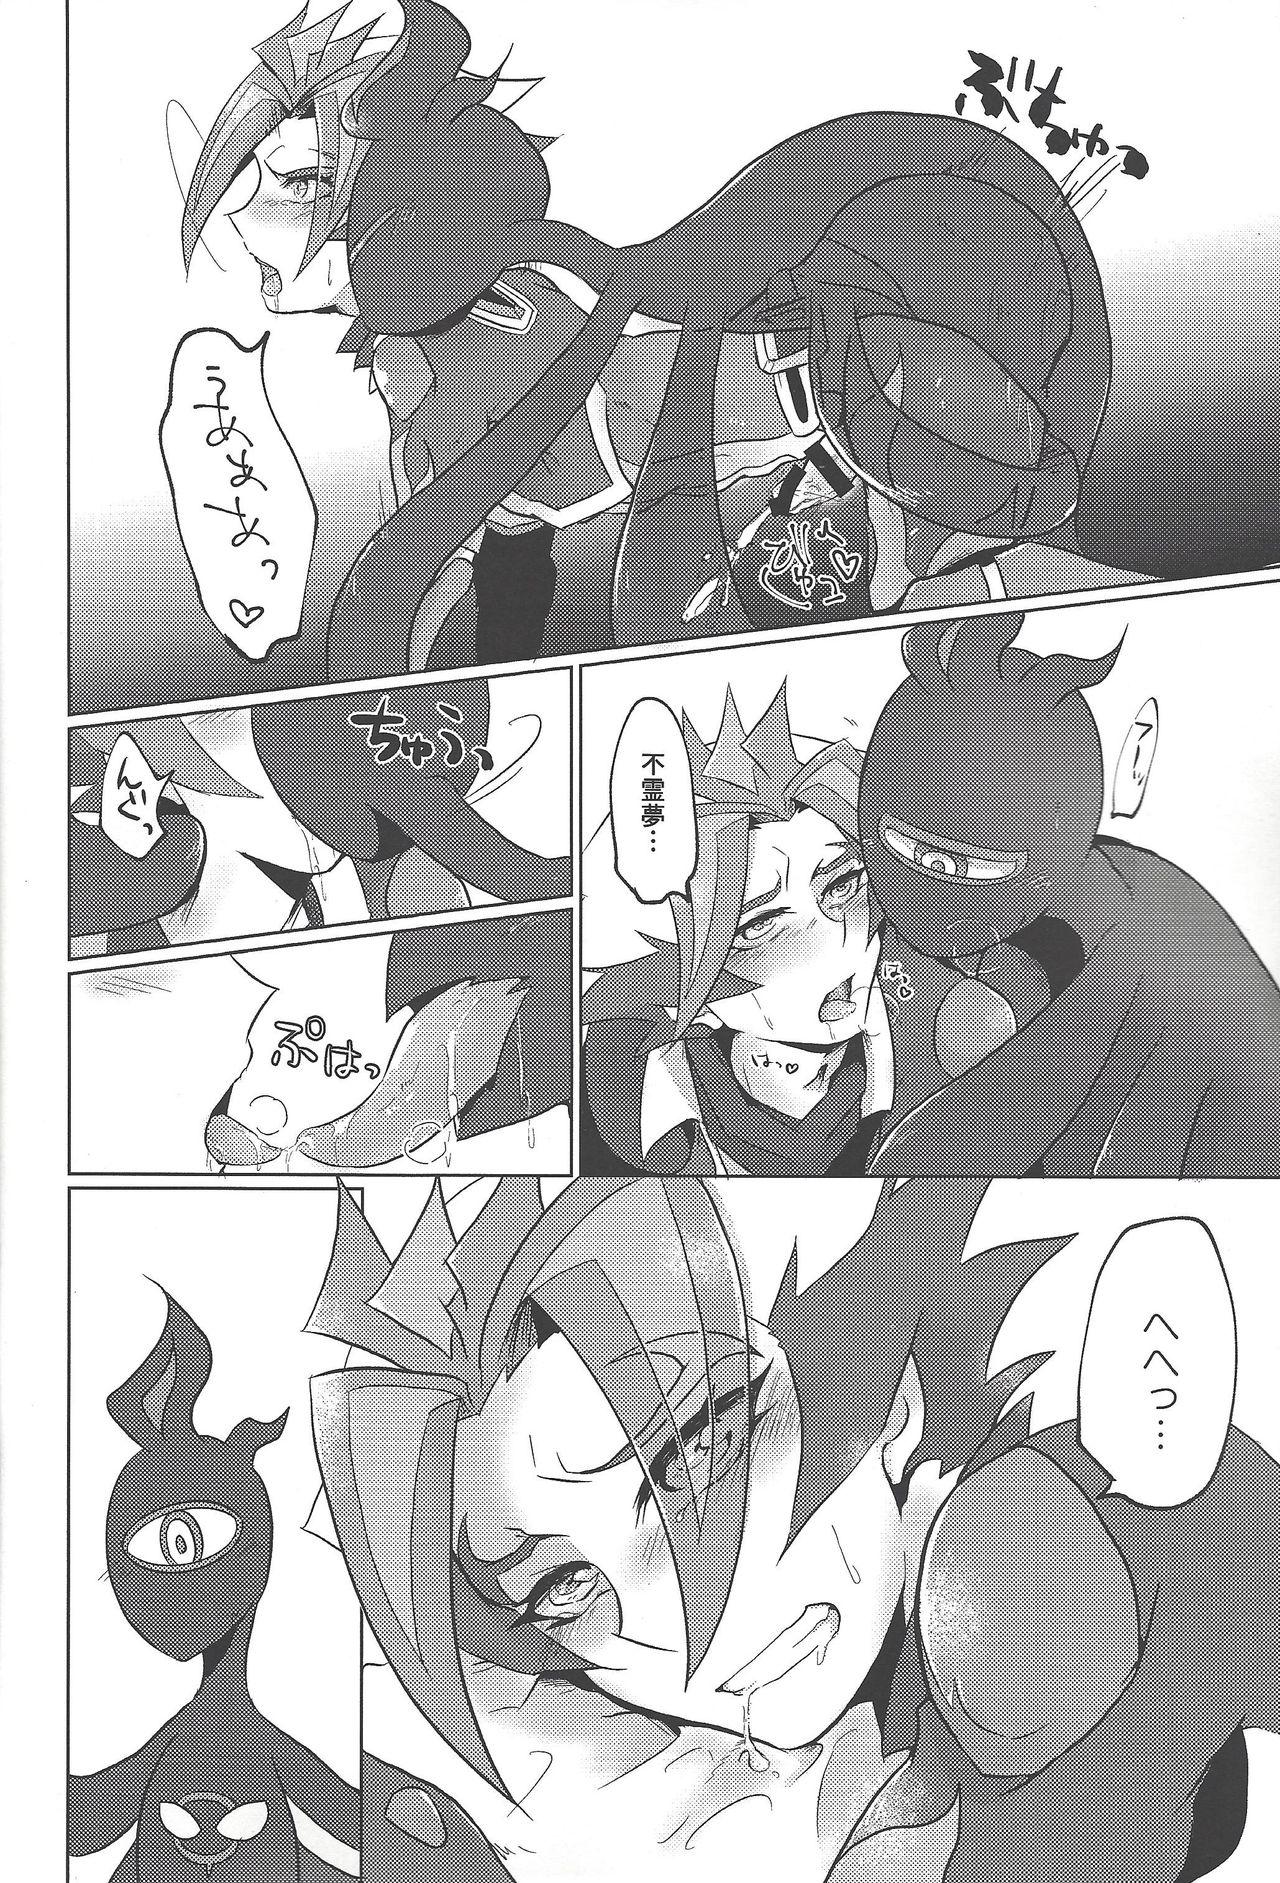 Tits Re:FRAMING - Yu-gi-oh vrains Brunette - Page 3